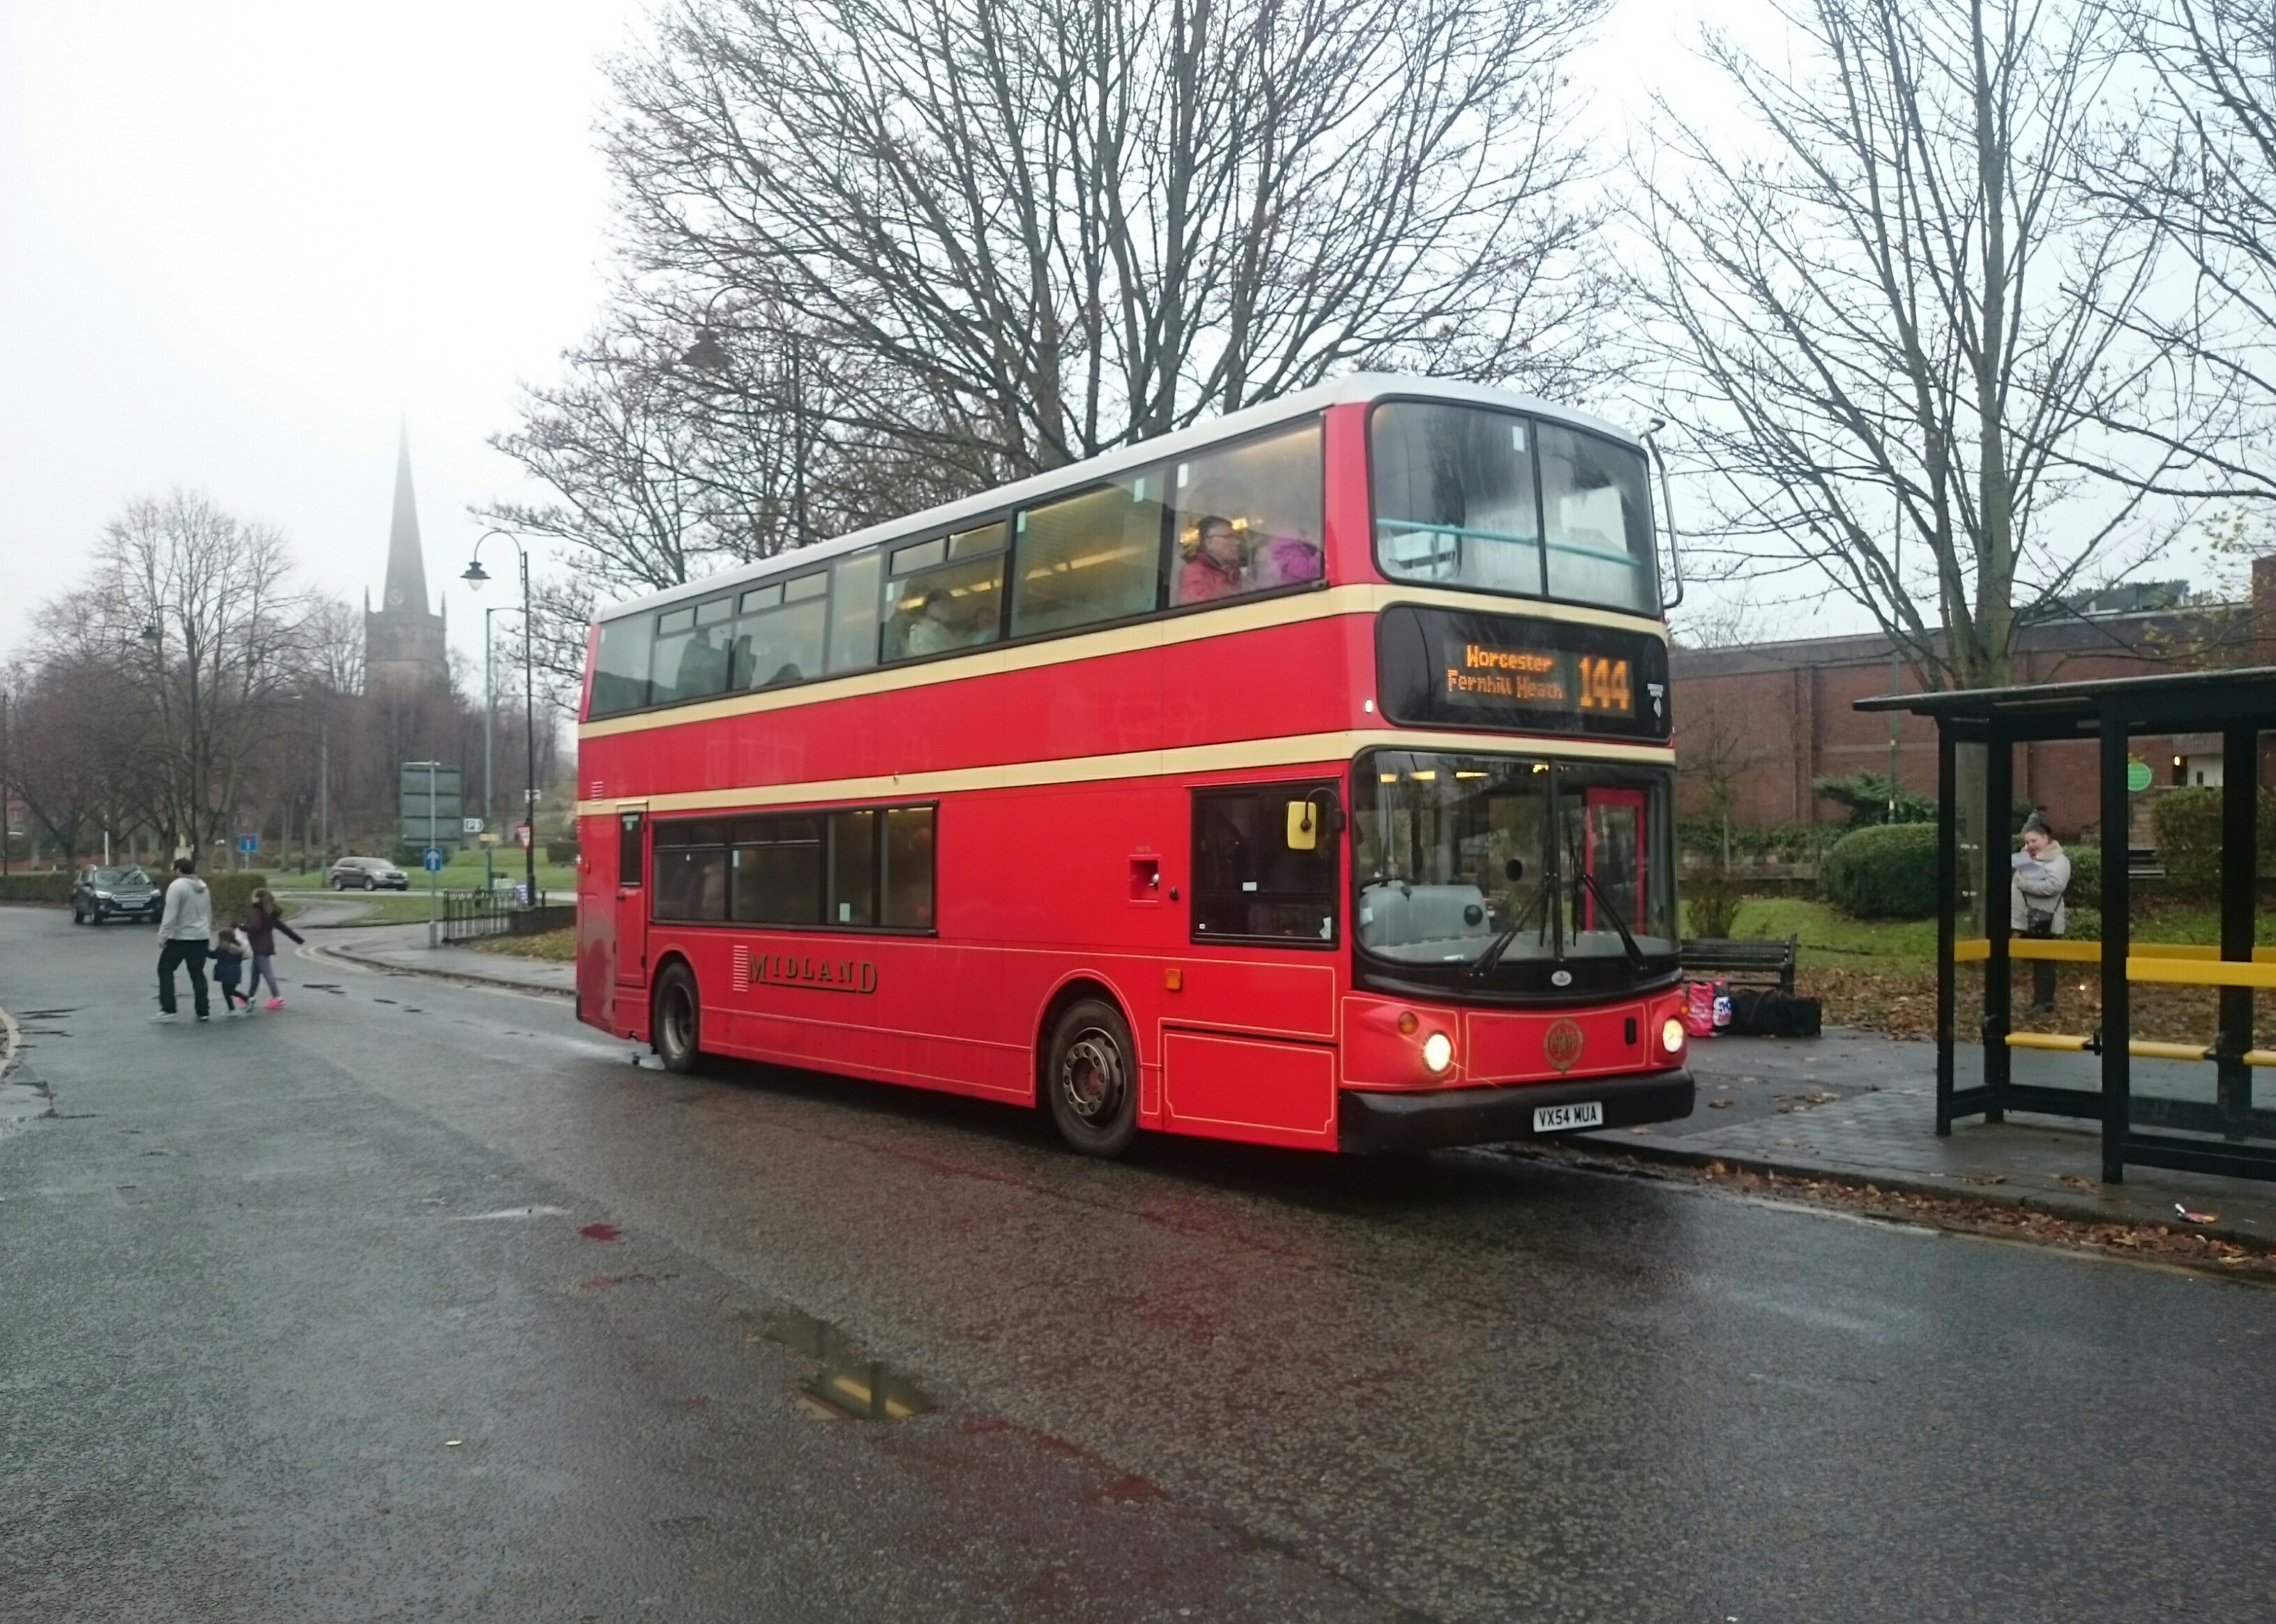 Routes extending far out from the West Midlands – 144 Birmingham to Worcester